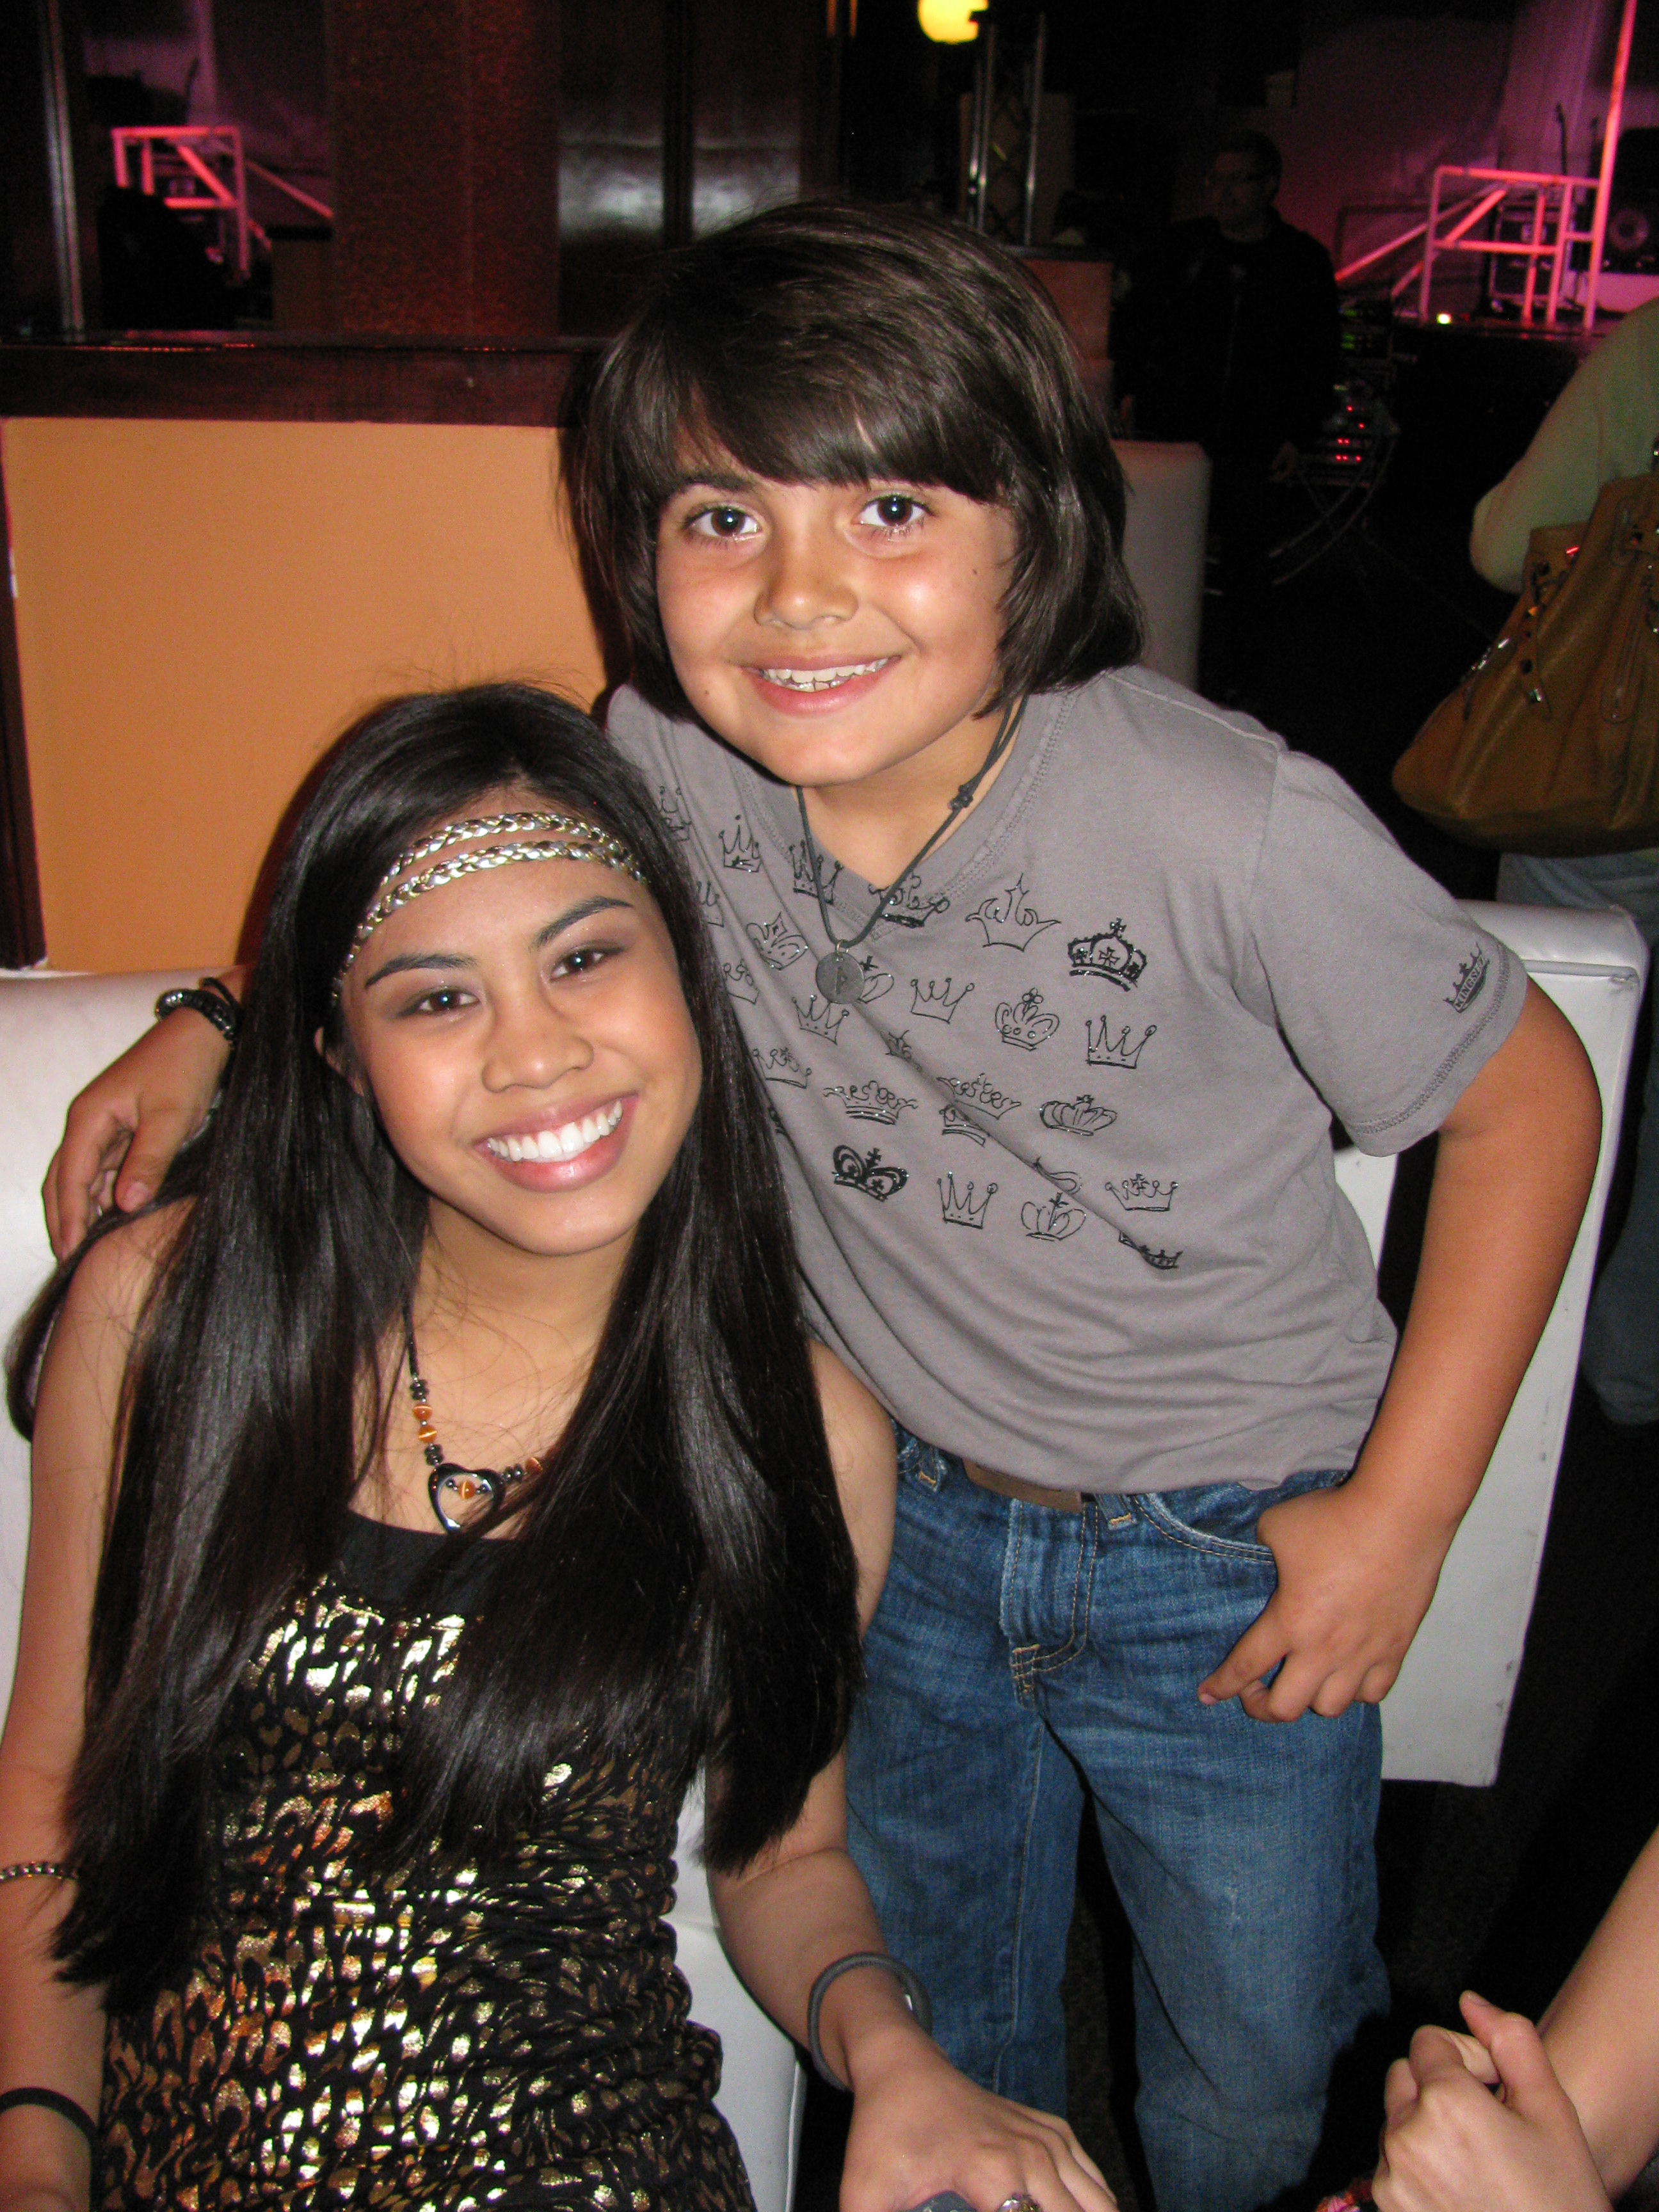 Parker Contreras and Ashley Argota of True Jackson, VP for Jeans Bring Dreams Concert and Gifting Suite.